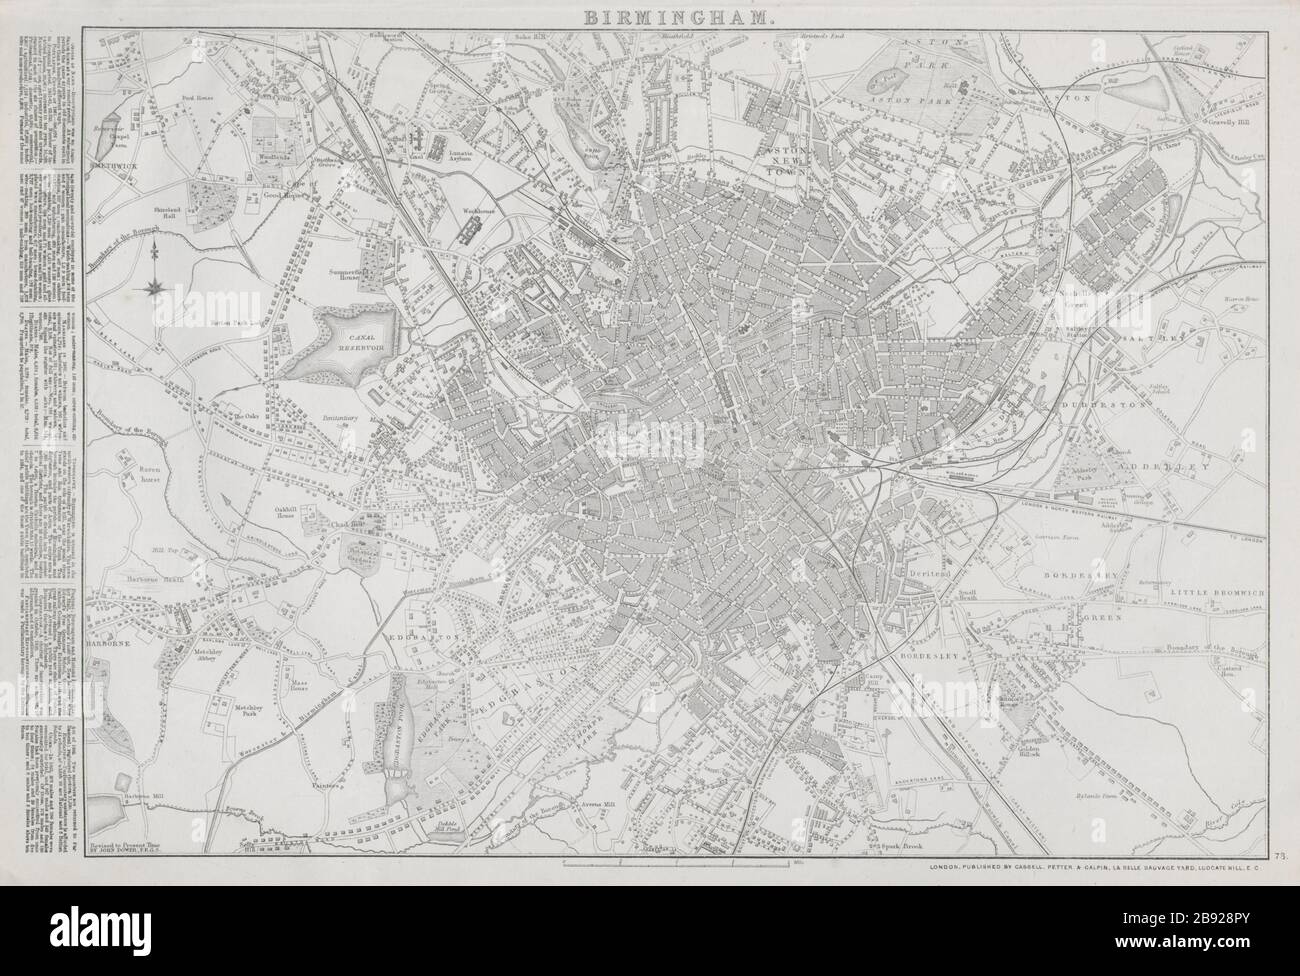 BIRMINGHAM. Large town/city plan by JW LOWRY for the Dispatch Atlas 1868 map Stock Photo